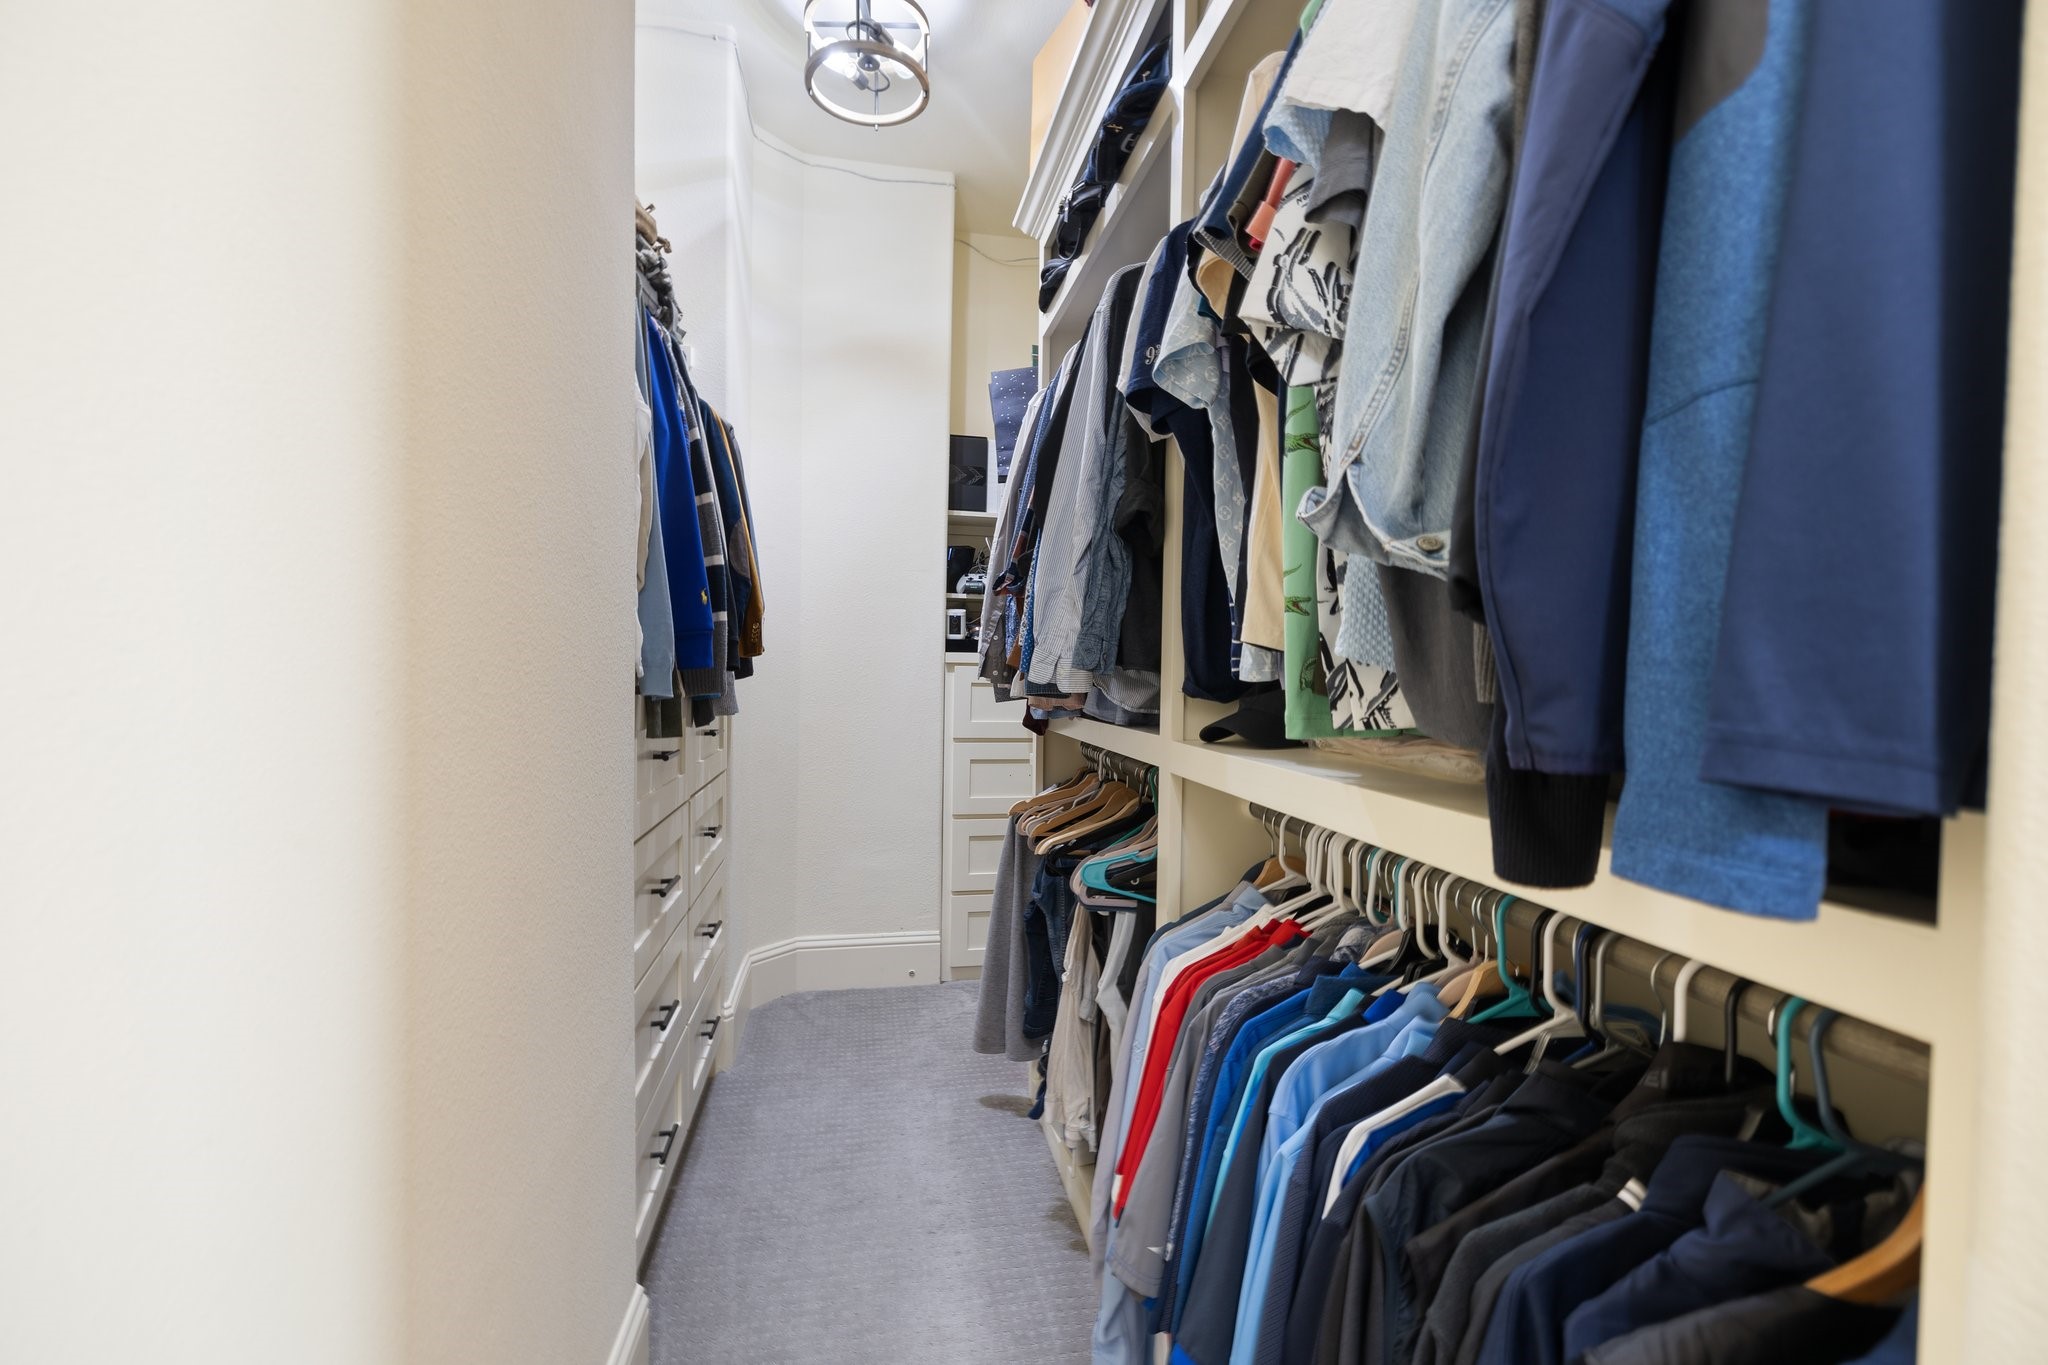 The primary closet has been customized to increase functionality and storage!